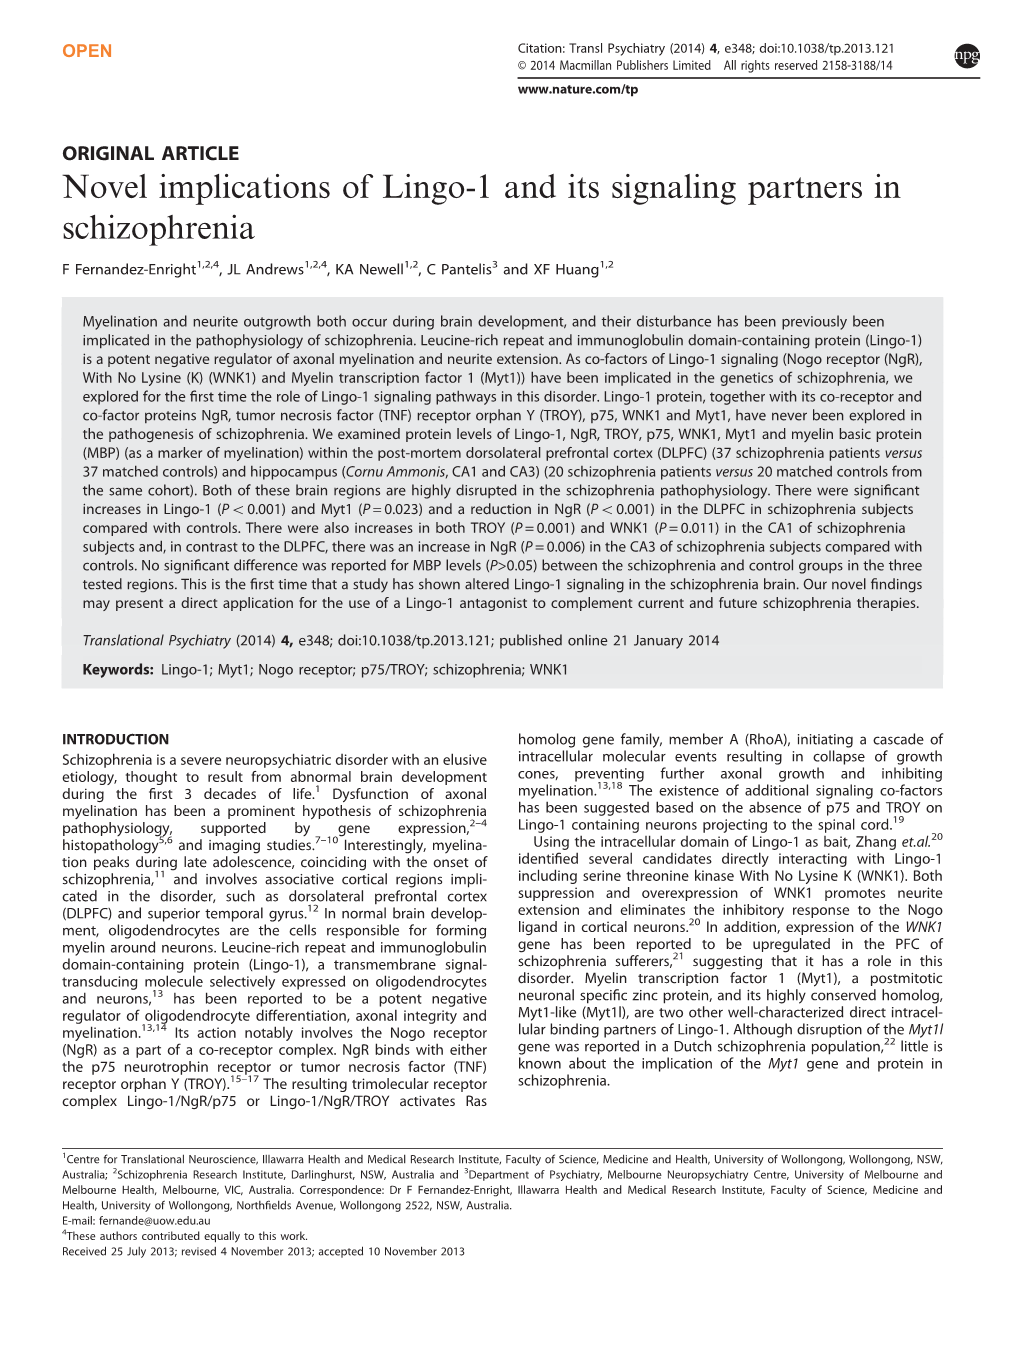 Novel Implications of Lingo-1 and Its Signaling Partners in Schizophrenia